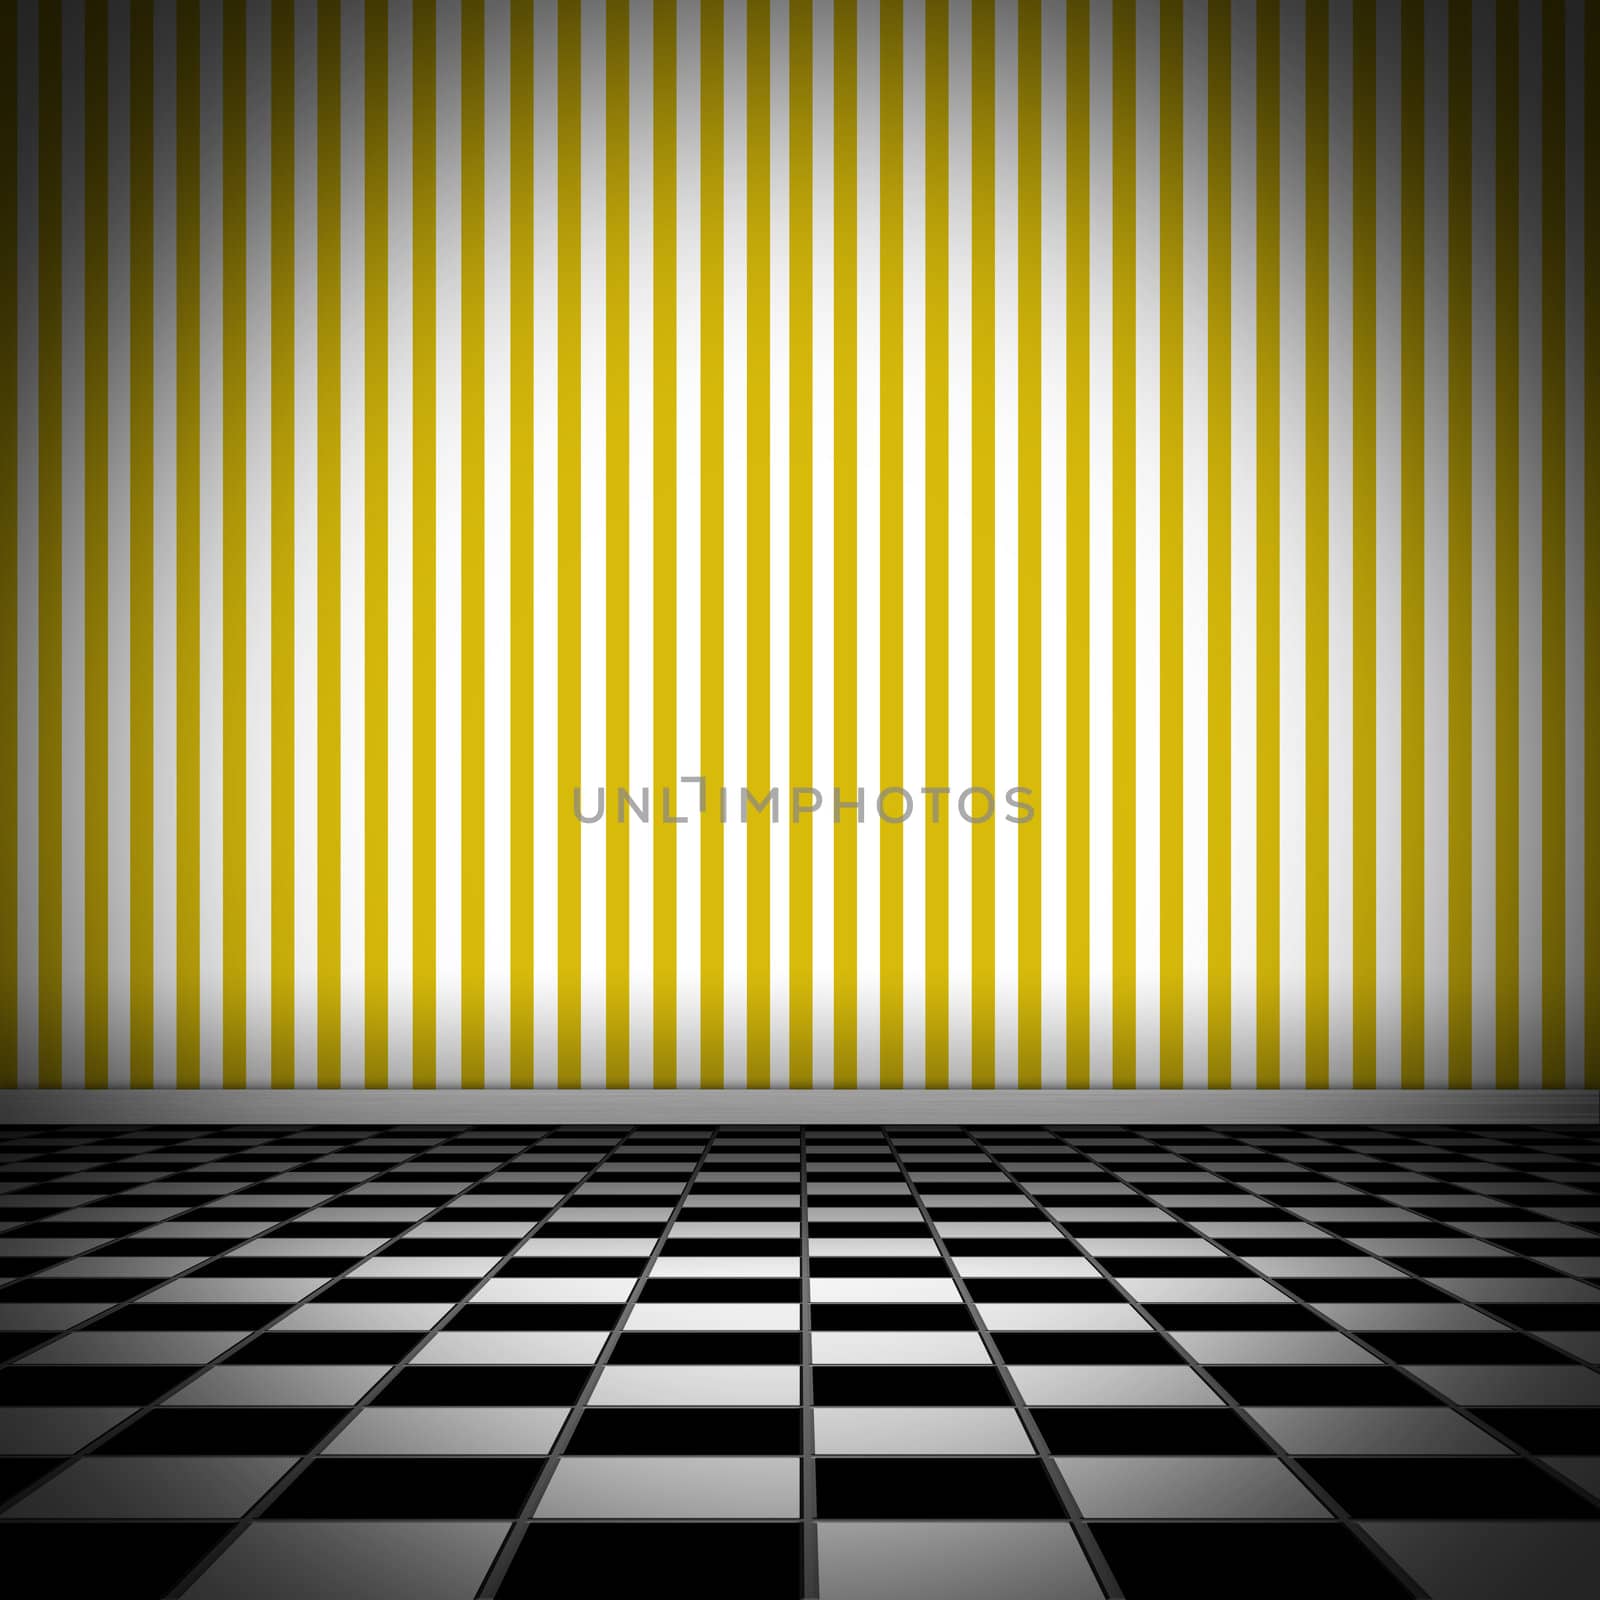 Illustration of a room with tiled floor and yellow striped wellpaper